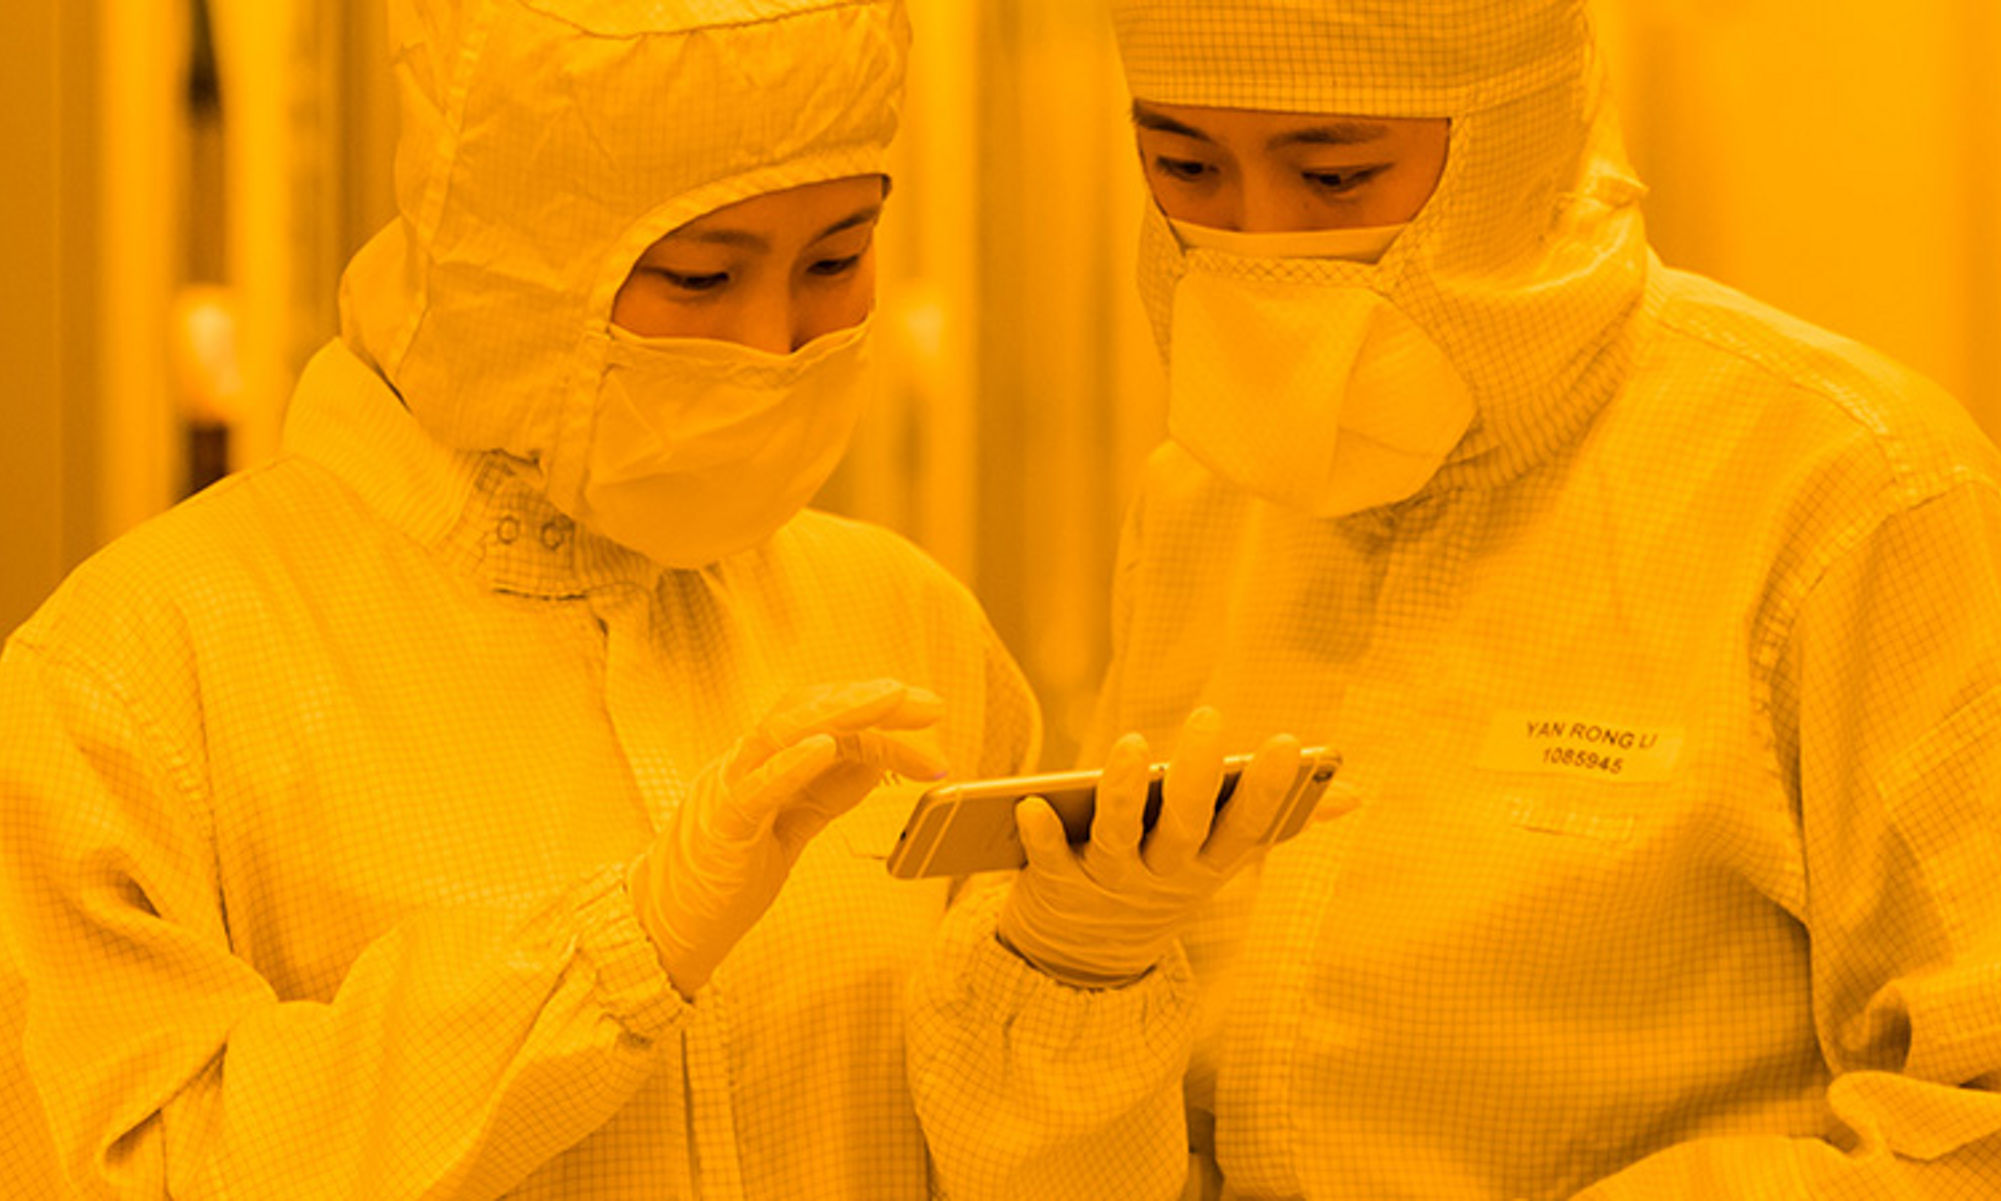 Two workers in clean-room attire intently reviewing specs